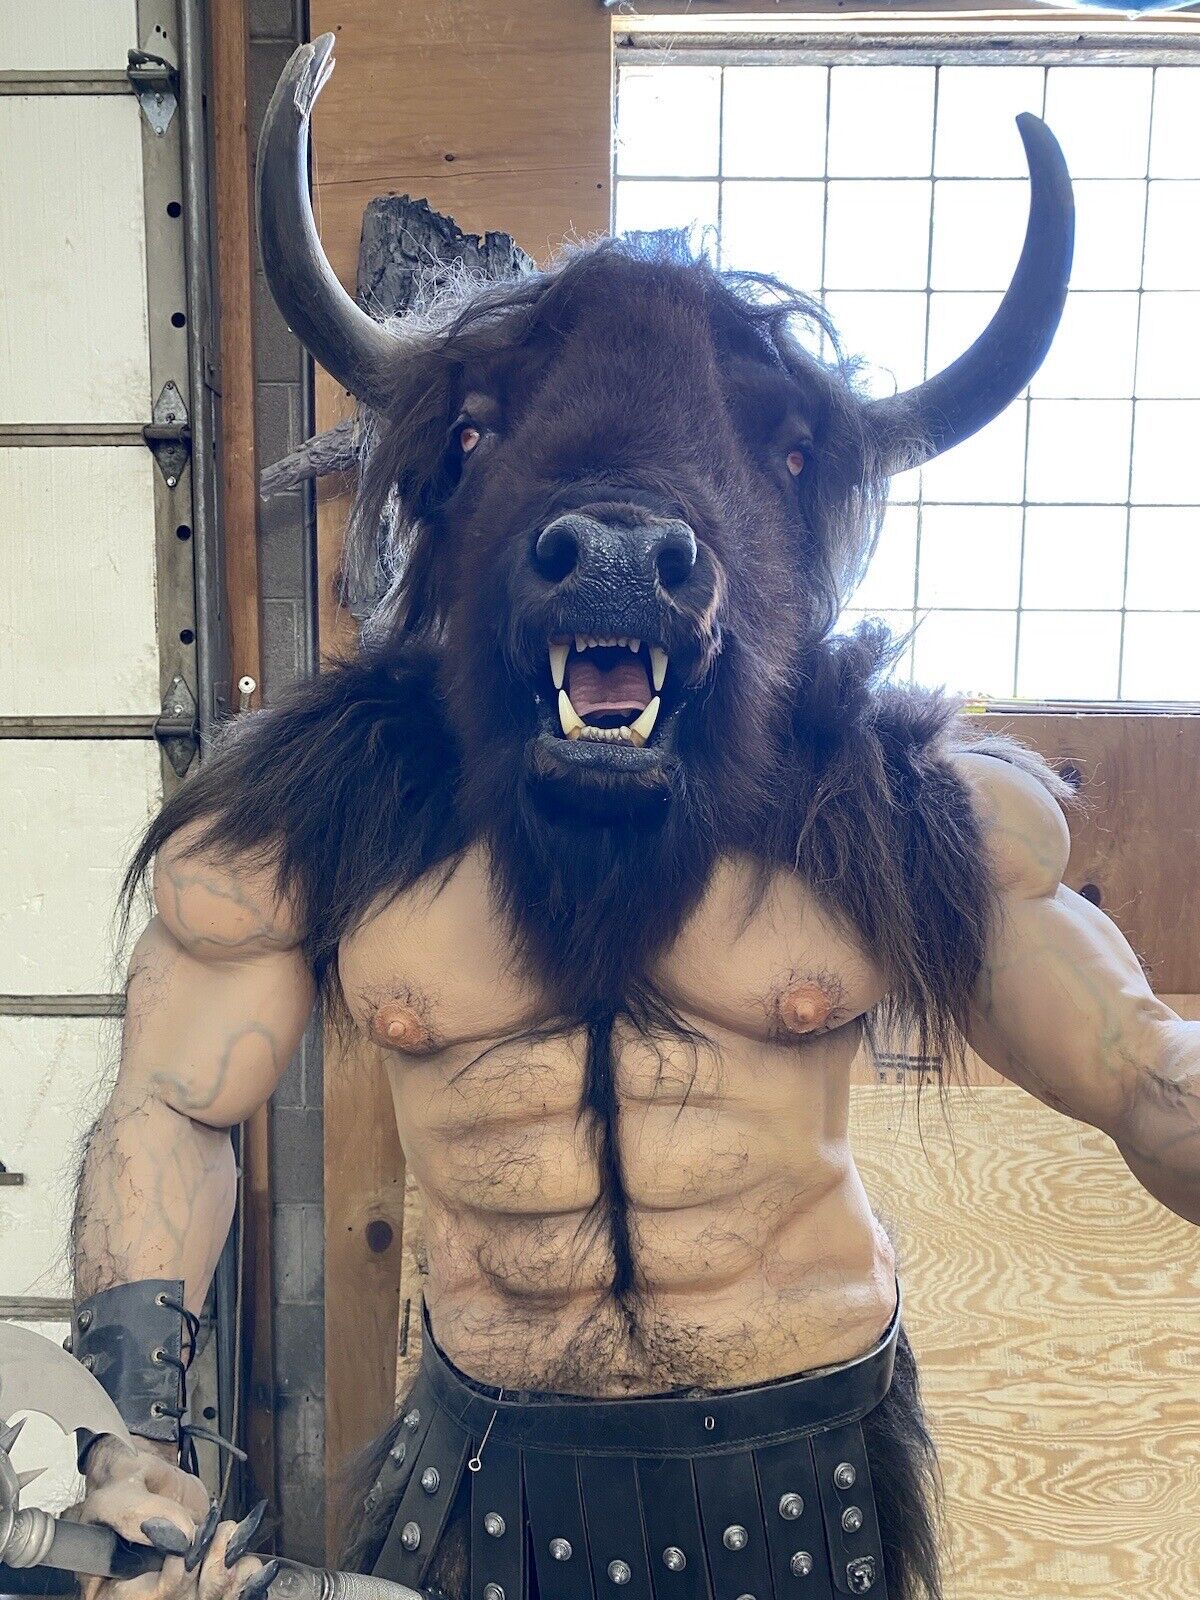 Minotaur,  Large Approximately 7 Foot, Handmade By Taxidermist, One Of A Kind